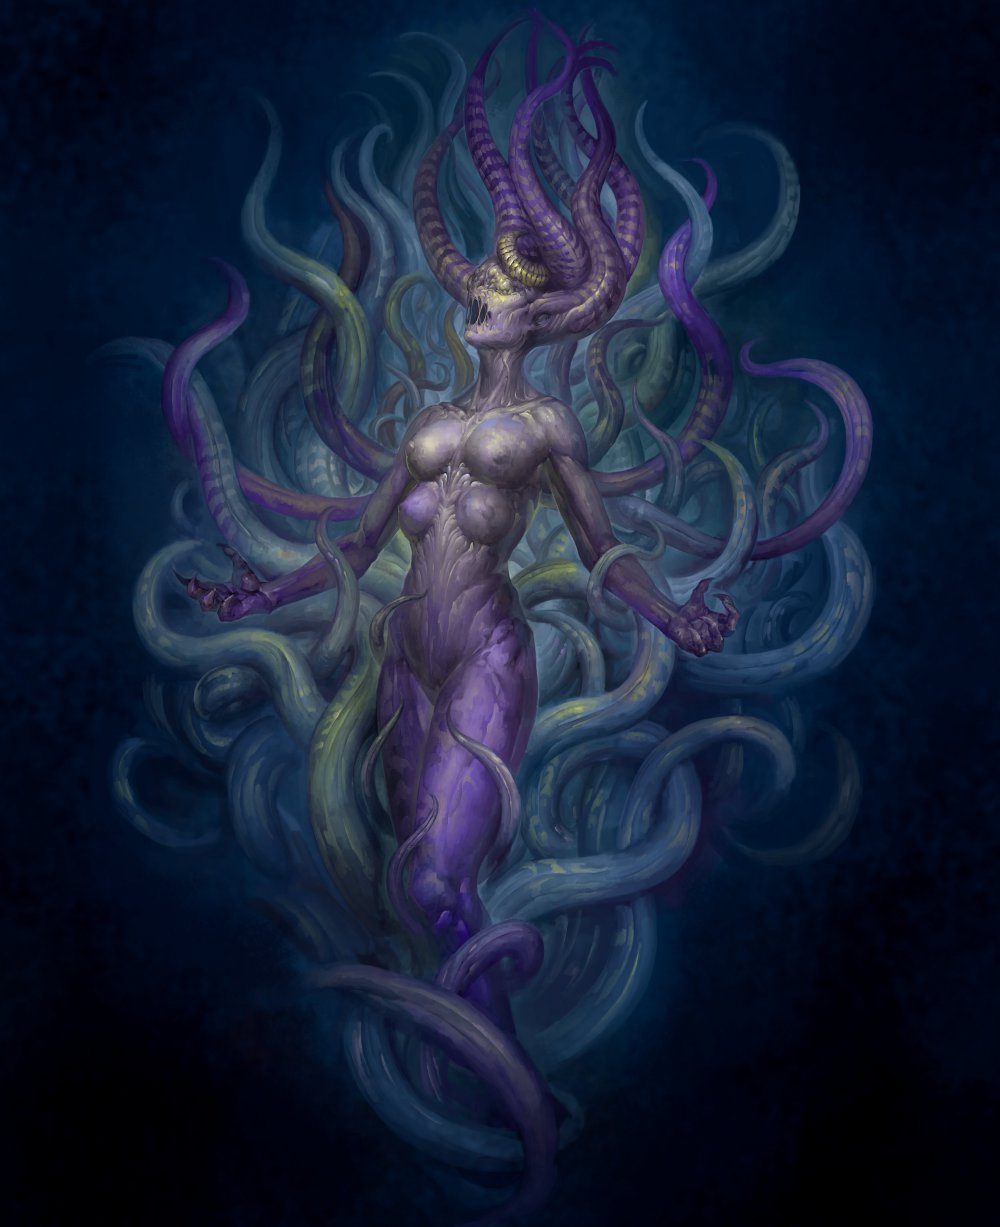 Showcasing Art about Cthulhu mythos, cephalopods, monsters, comics, toys, g...